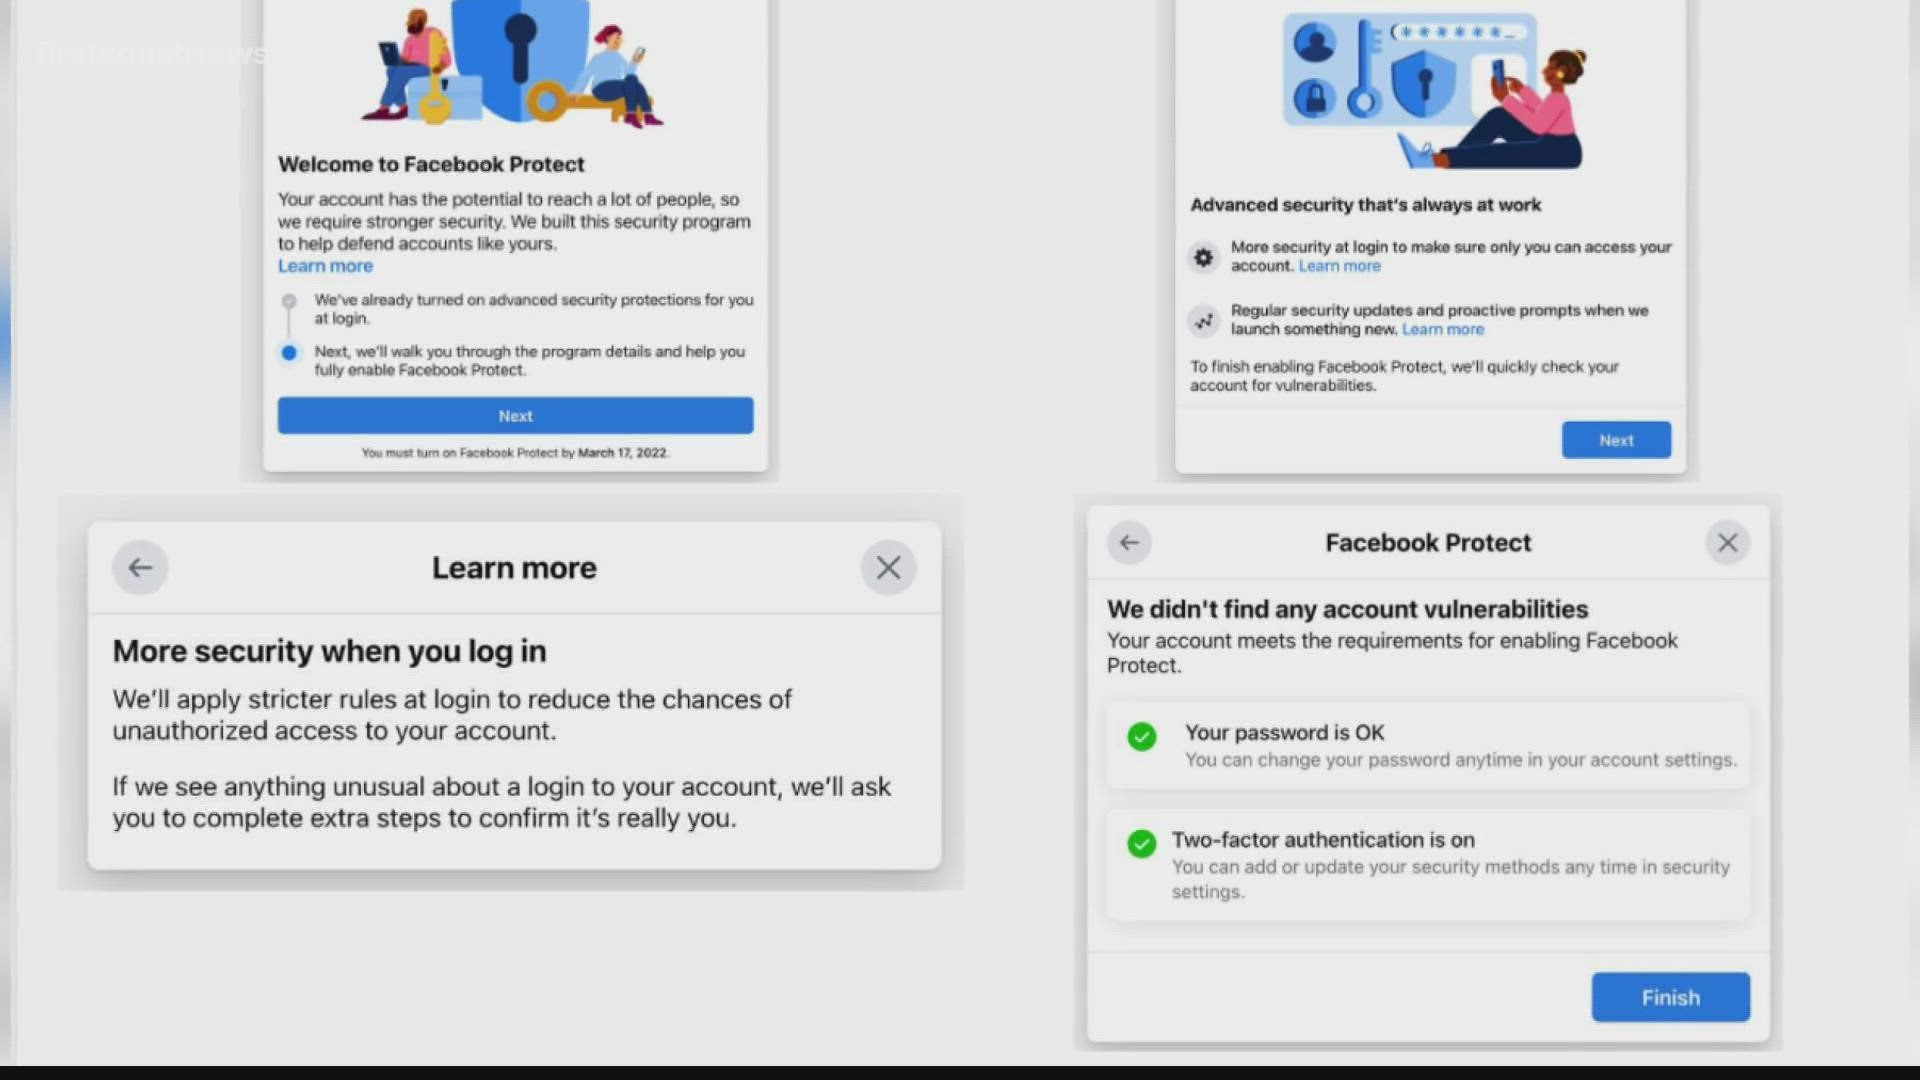 Facebook: Here's How to Turn On Two-Factor Authentication